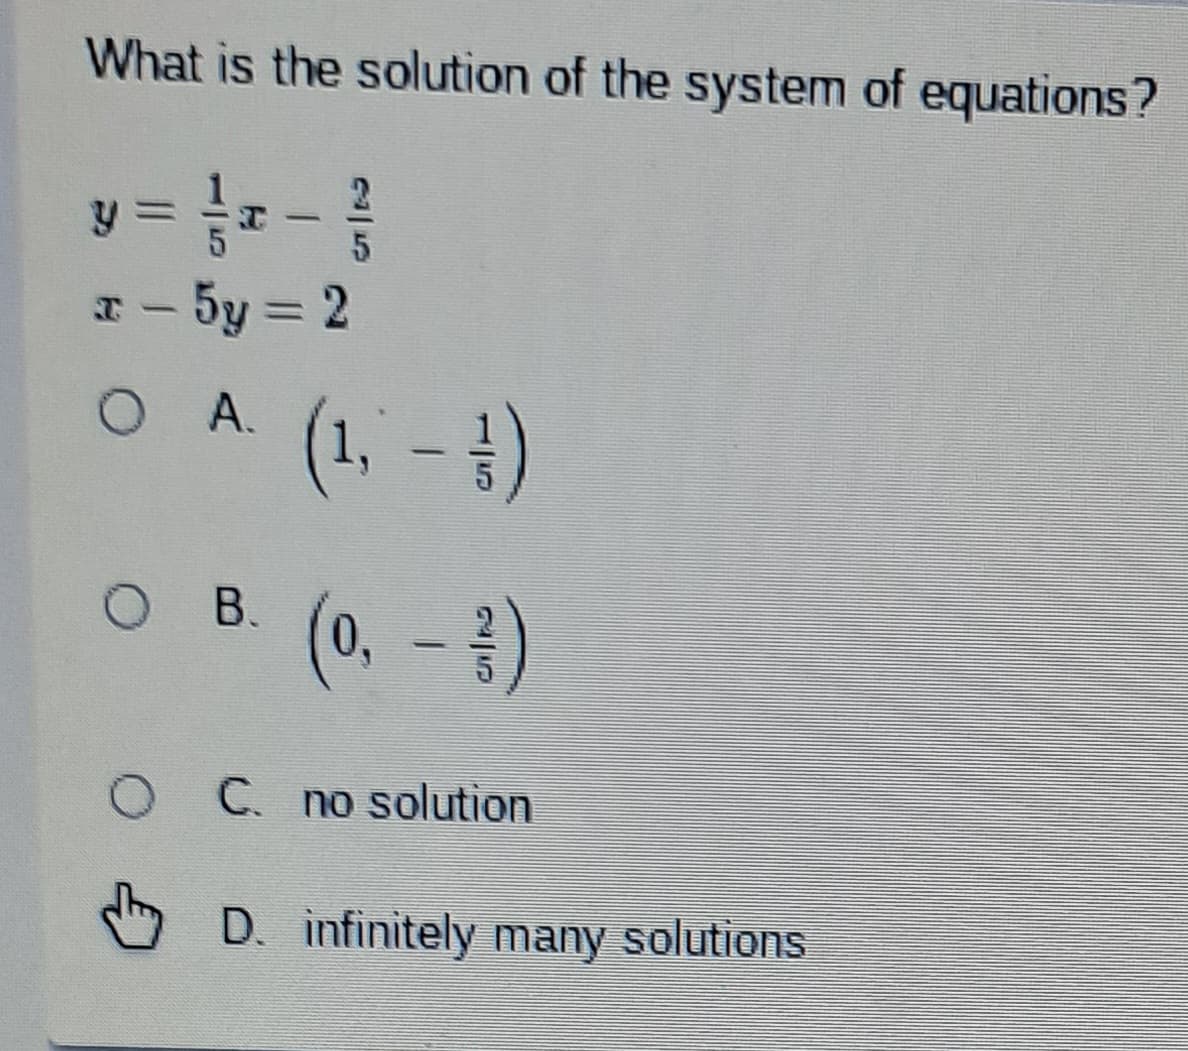 What is the solution of the system of equations?
2
y = 1/x - 5
x - 5y = 2
O A.
O B.
O
(1, -1)
(0, -3)
C. no solution
D. infinitely many solutions